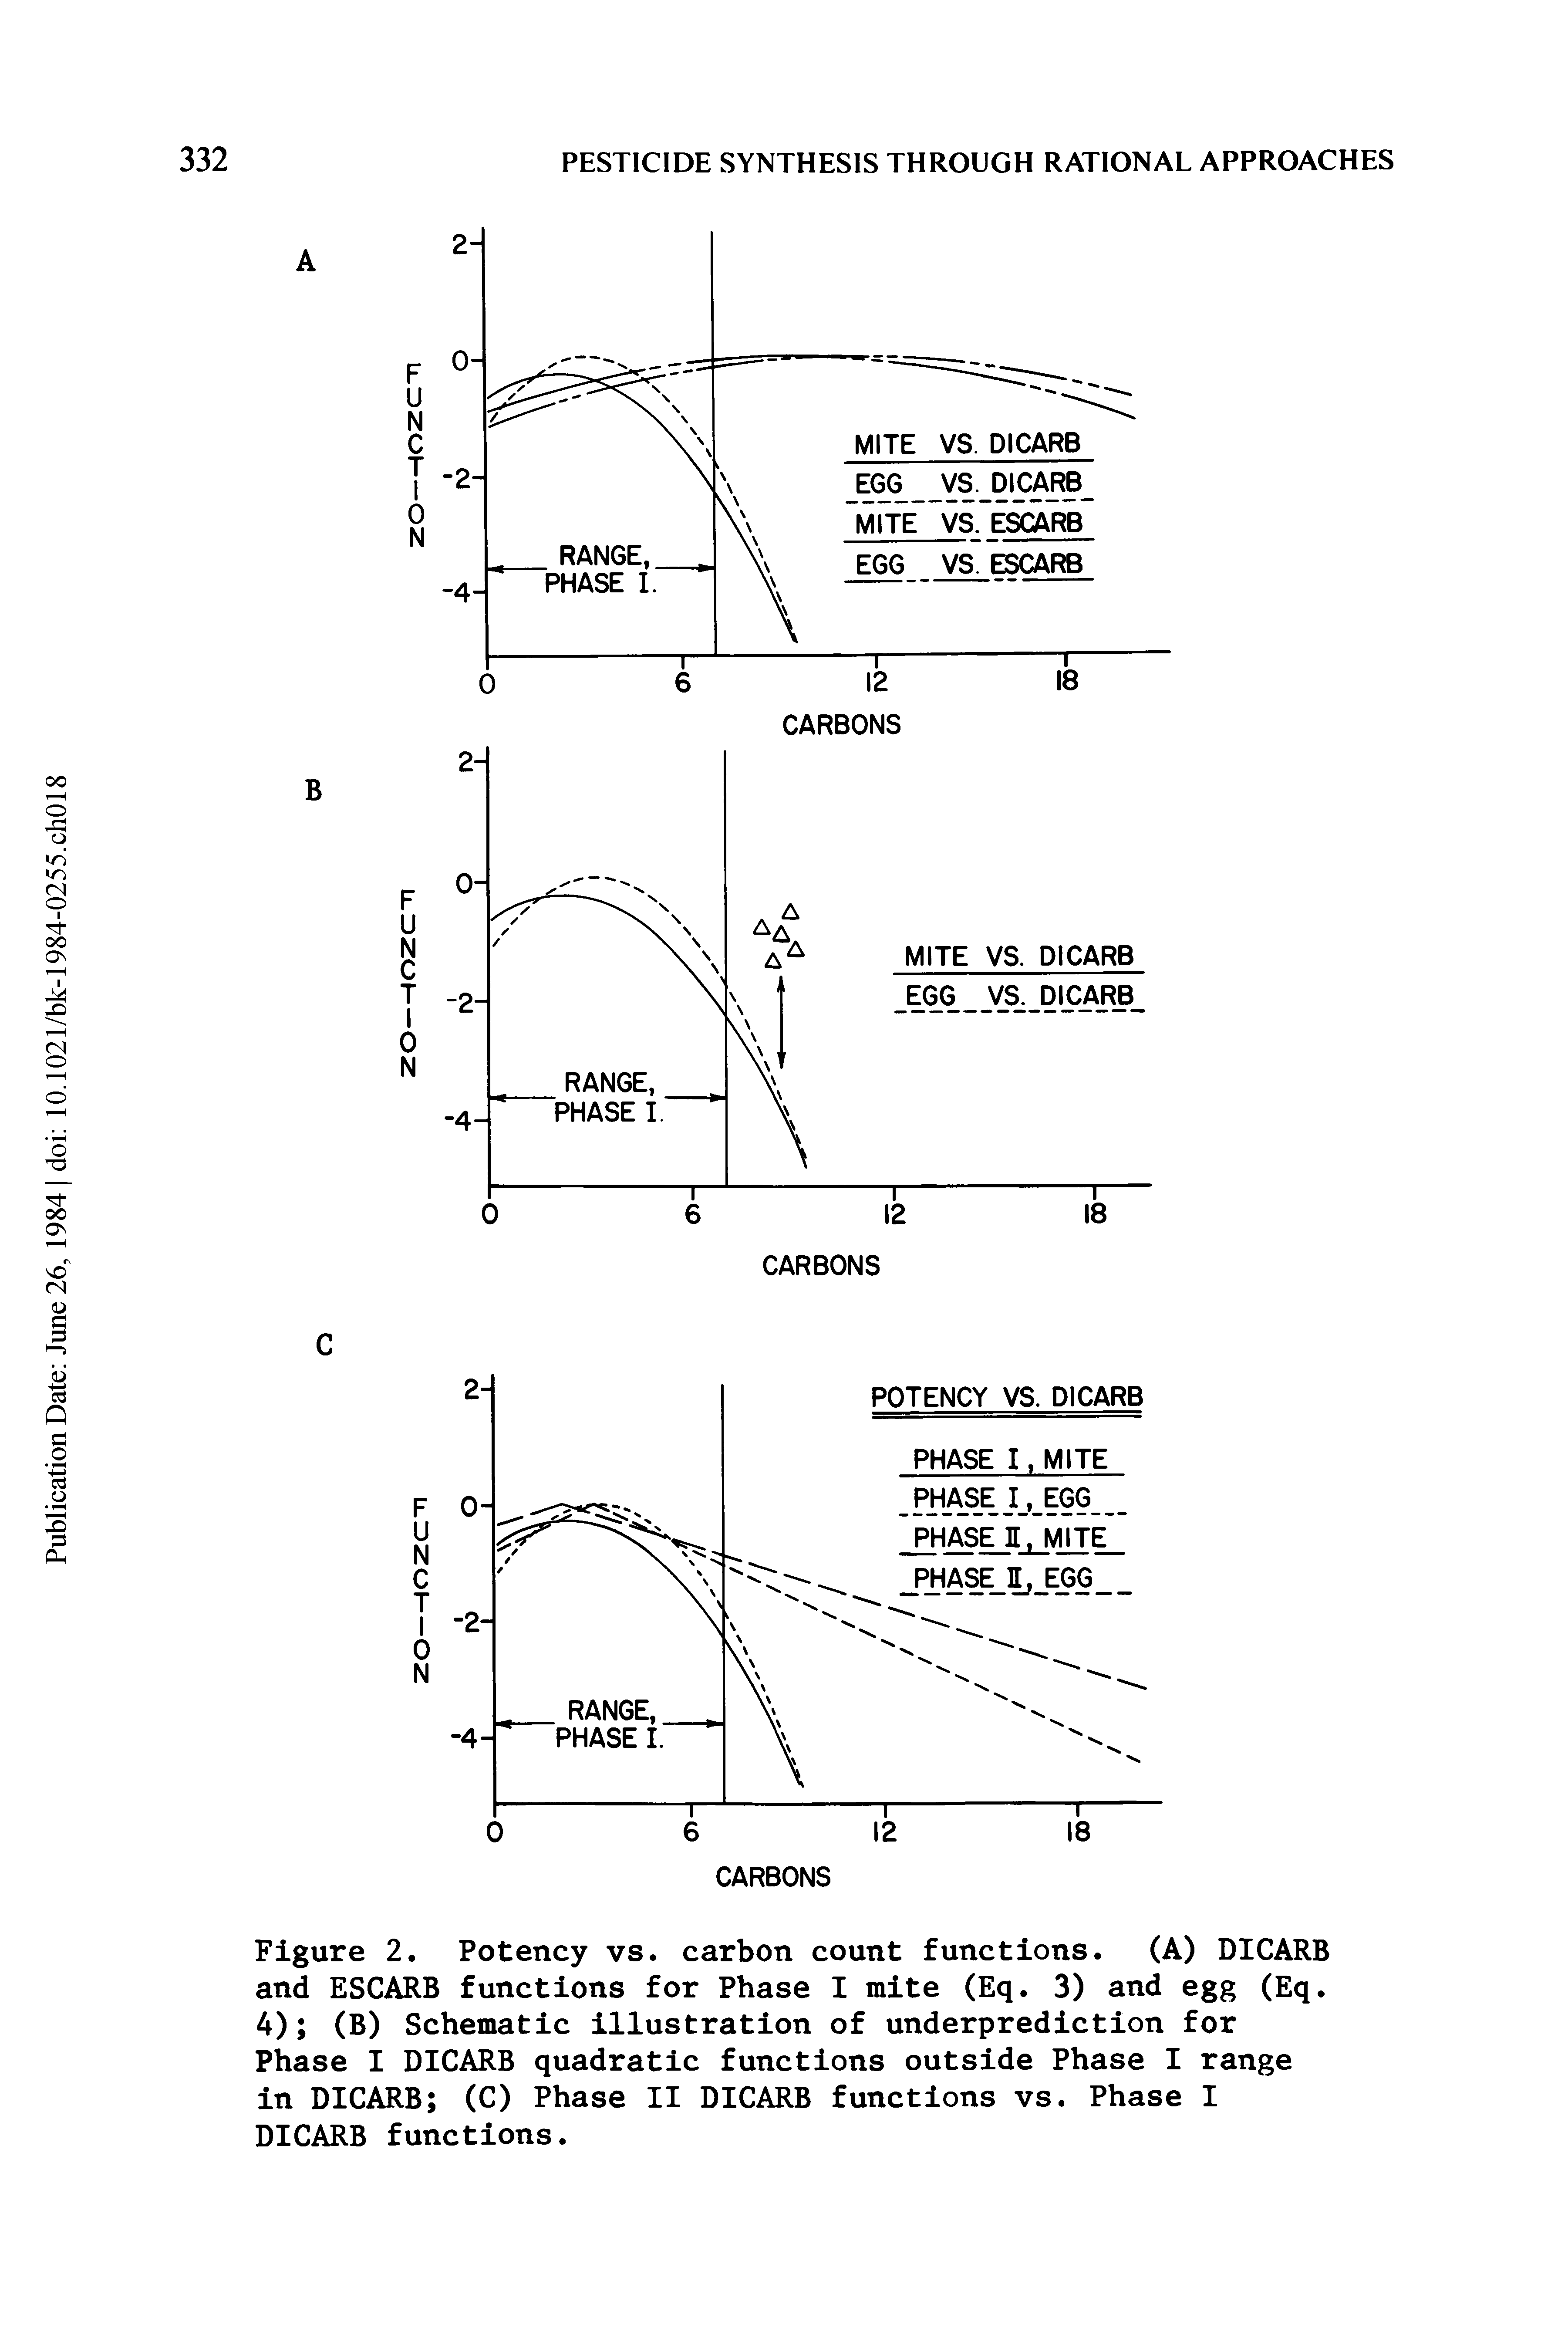 Figure 2. Potency vs. carbon count functions. (A) DICARB and ESCARB functions for Phase I mite (Eq. 3) and egg (Eq. 4) (B) Schematic illustration of underprediction for Phase I DICARB quadratic functions outside Phase I range in DICARB (C) Phase II DICARB functions vs. Phase I DICARB functions.